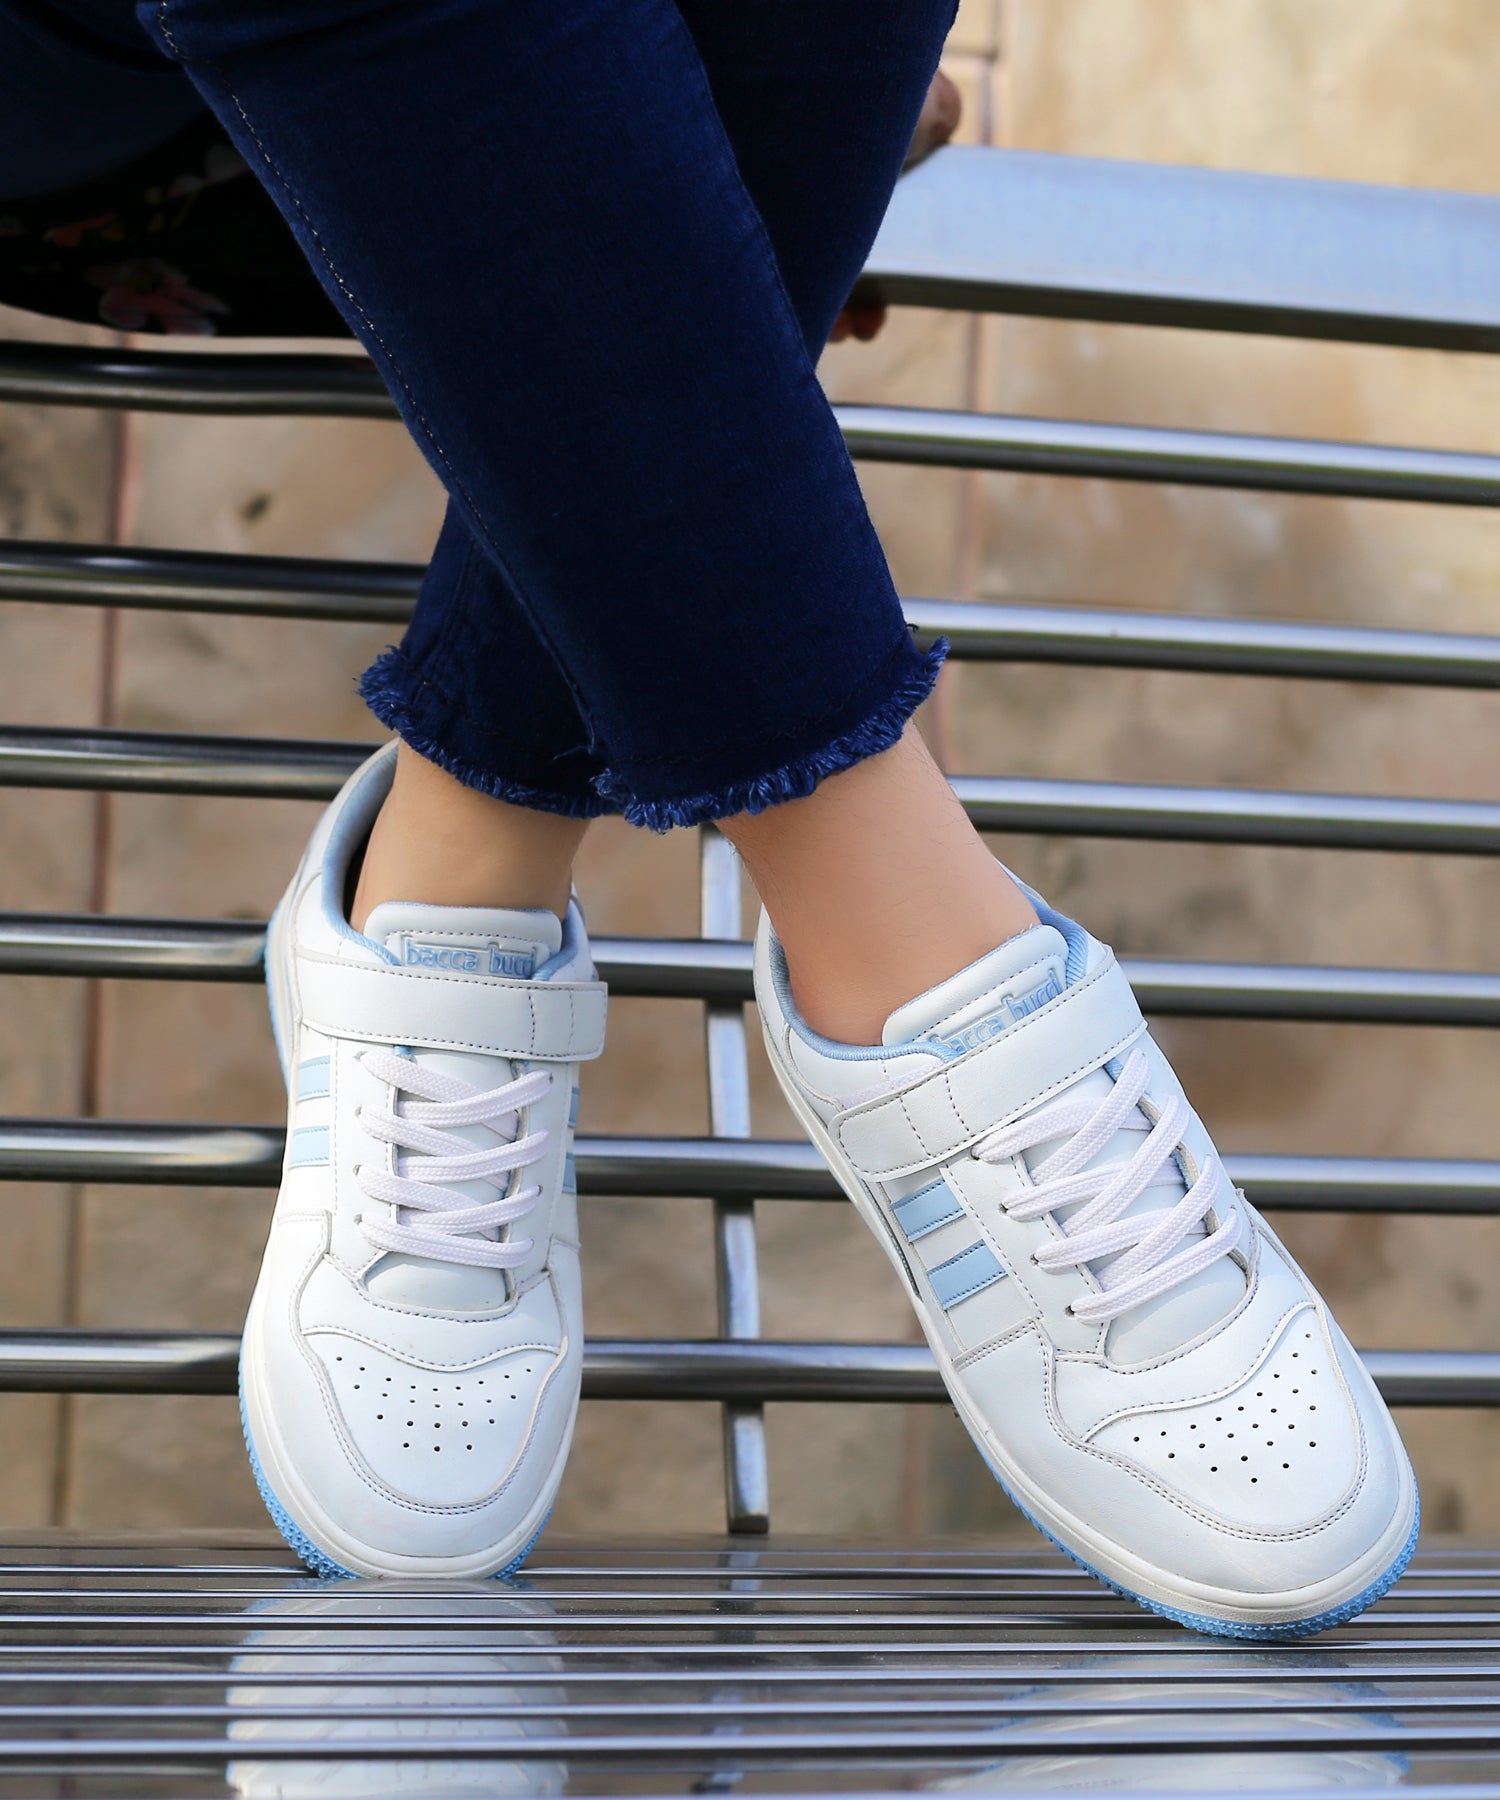 White Shoes For Womens - Buy White Shoes For Womens & Girls White Shoes  Online At Best Prices - Flipkart.com